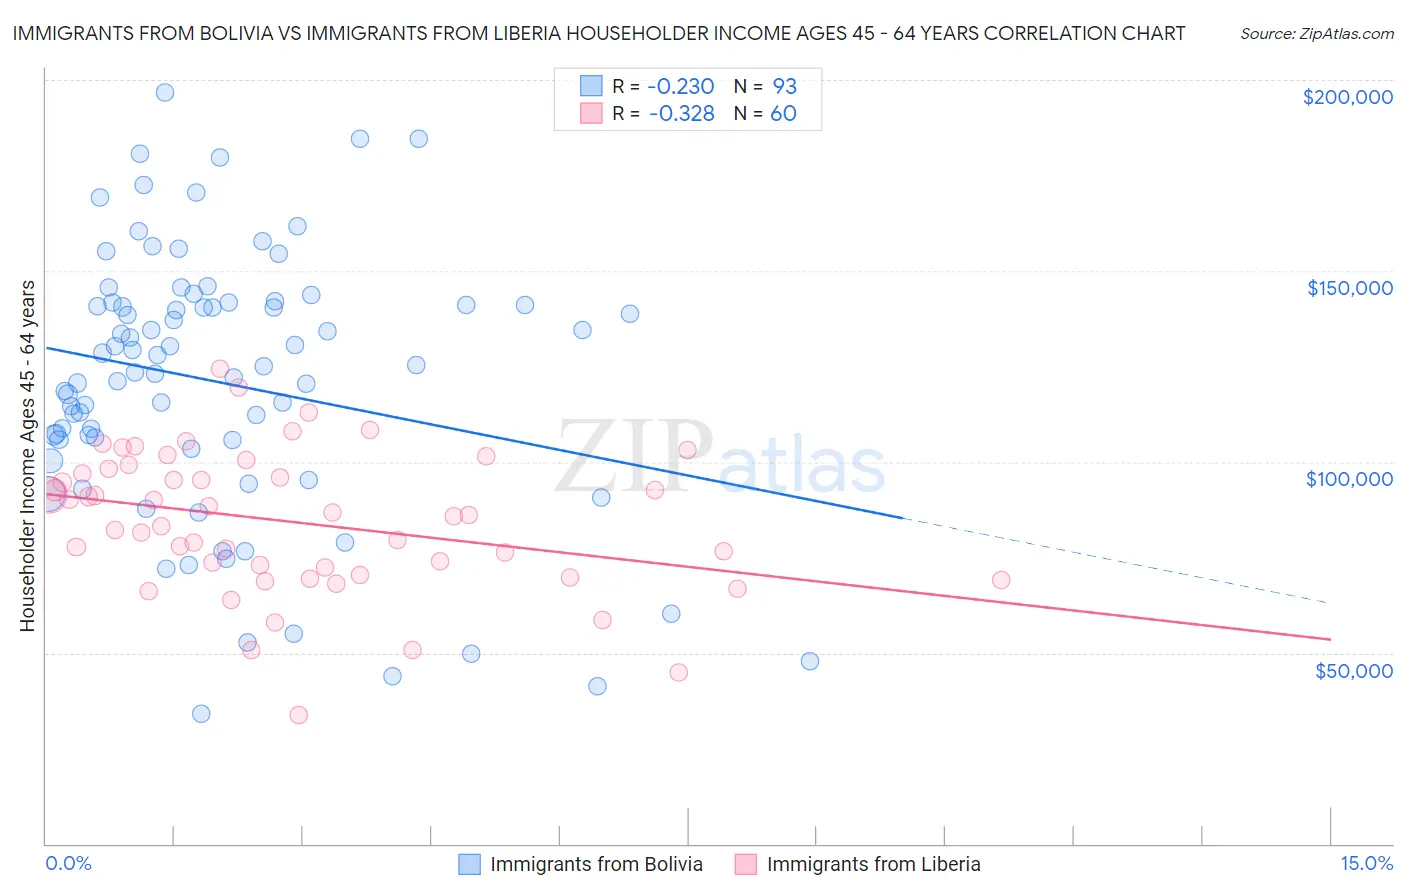 Immigrants from Bolivia vs Immigrants from Liberia Householder Income Ages 45 - 64 years